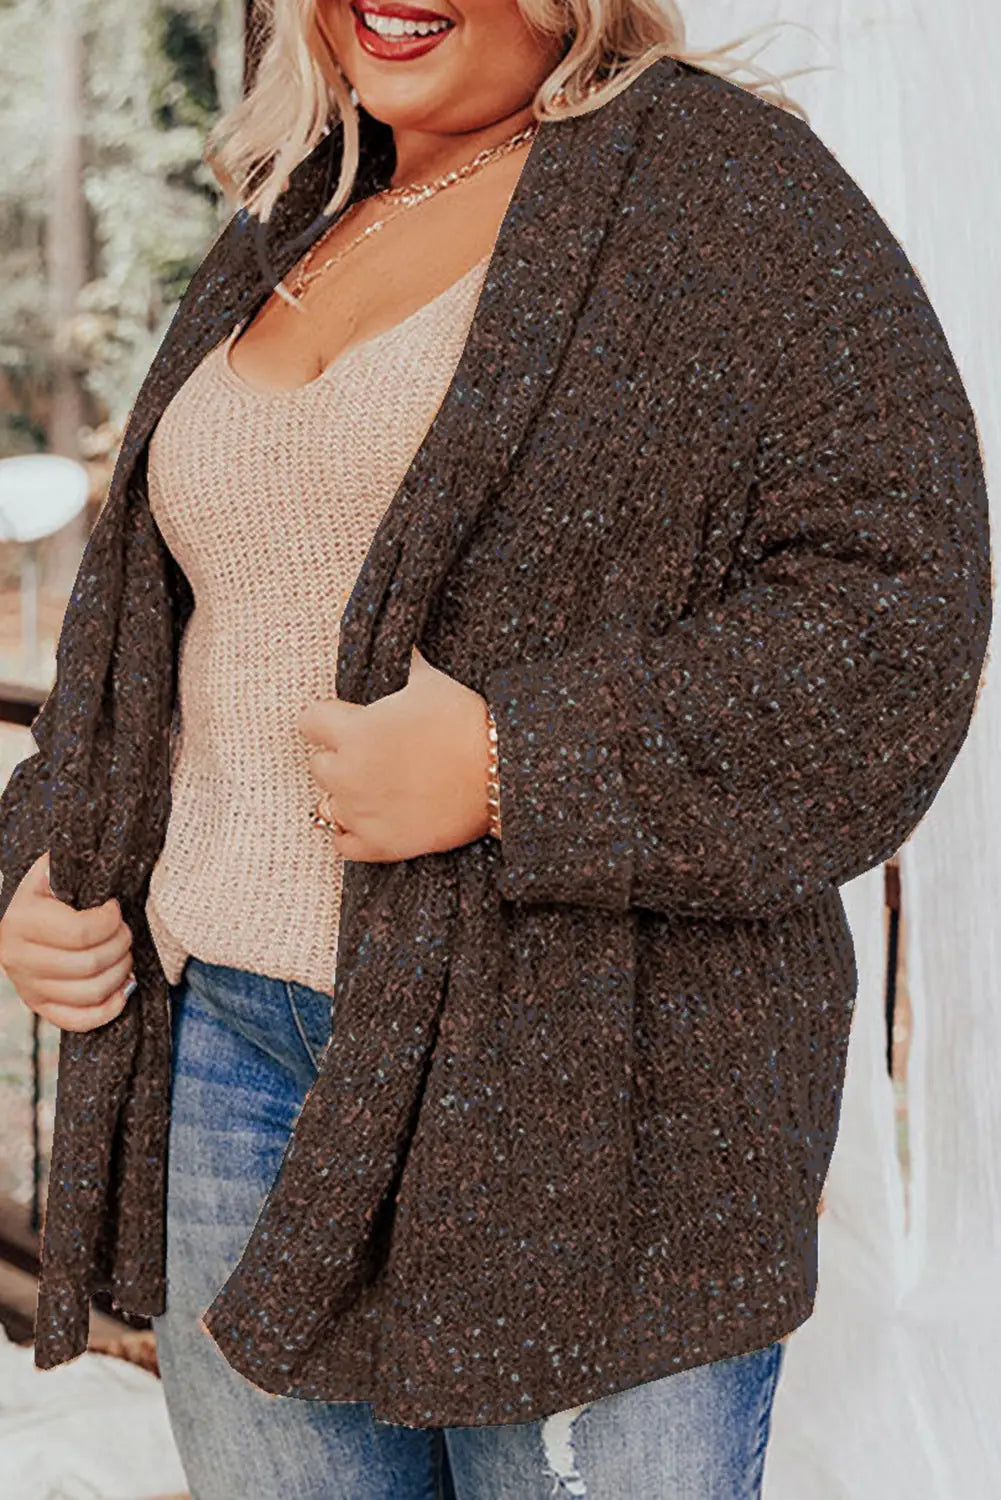 Bonbon open front knit plus size cozy cardigan - chicory coffee / 1x 100% polyester